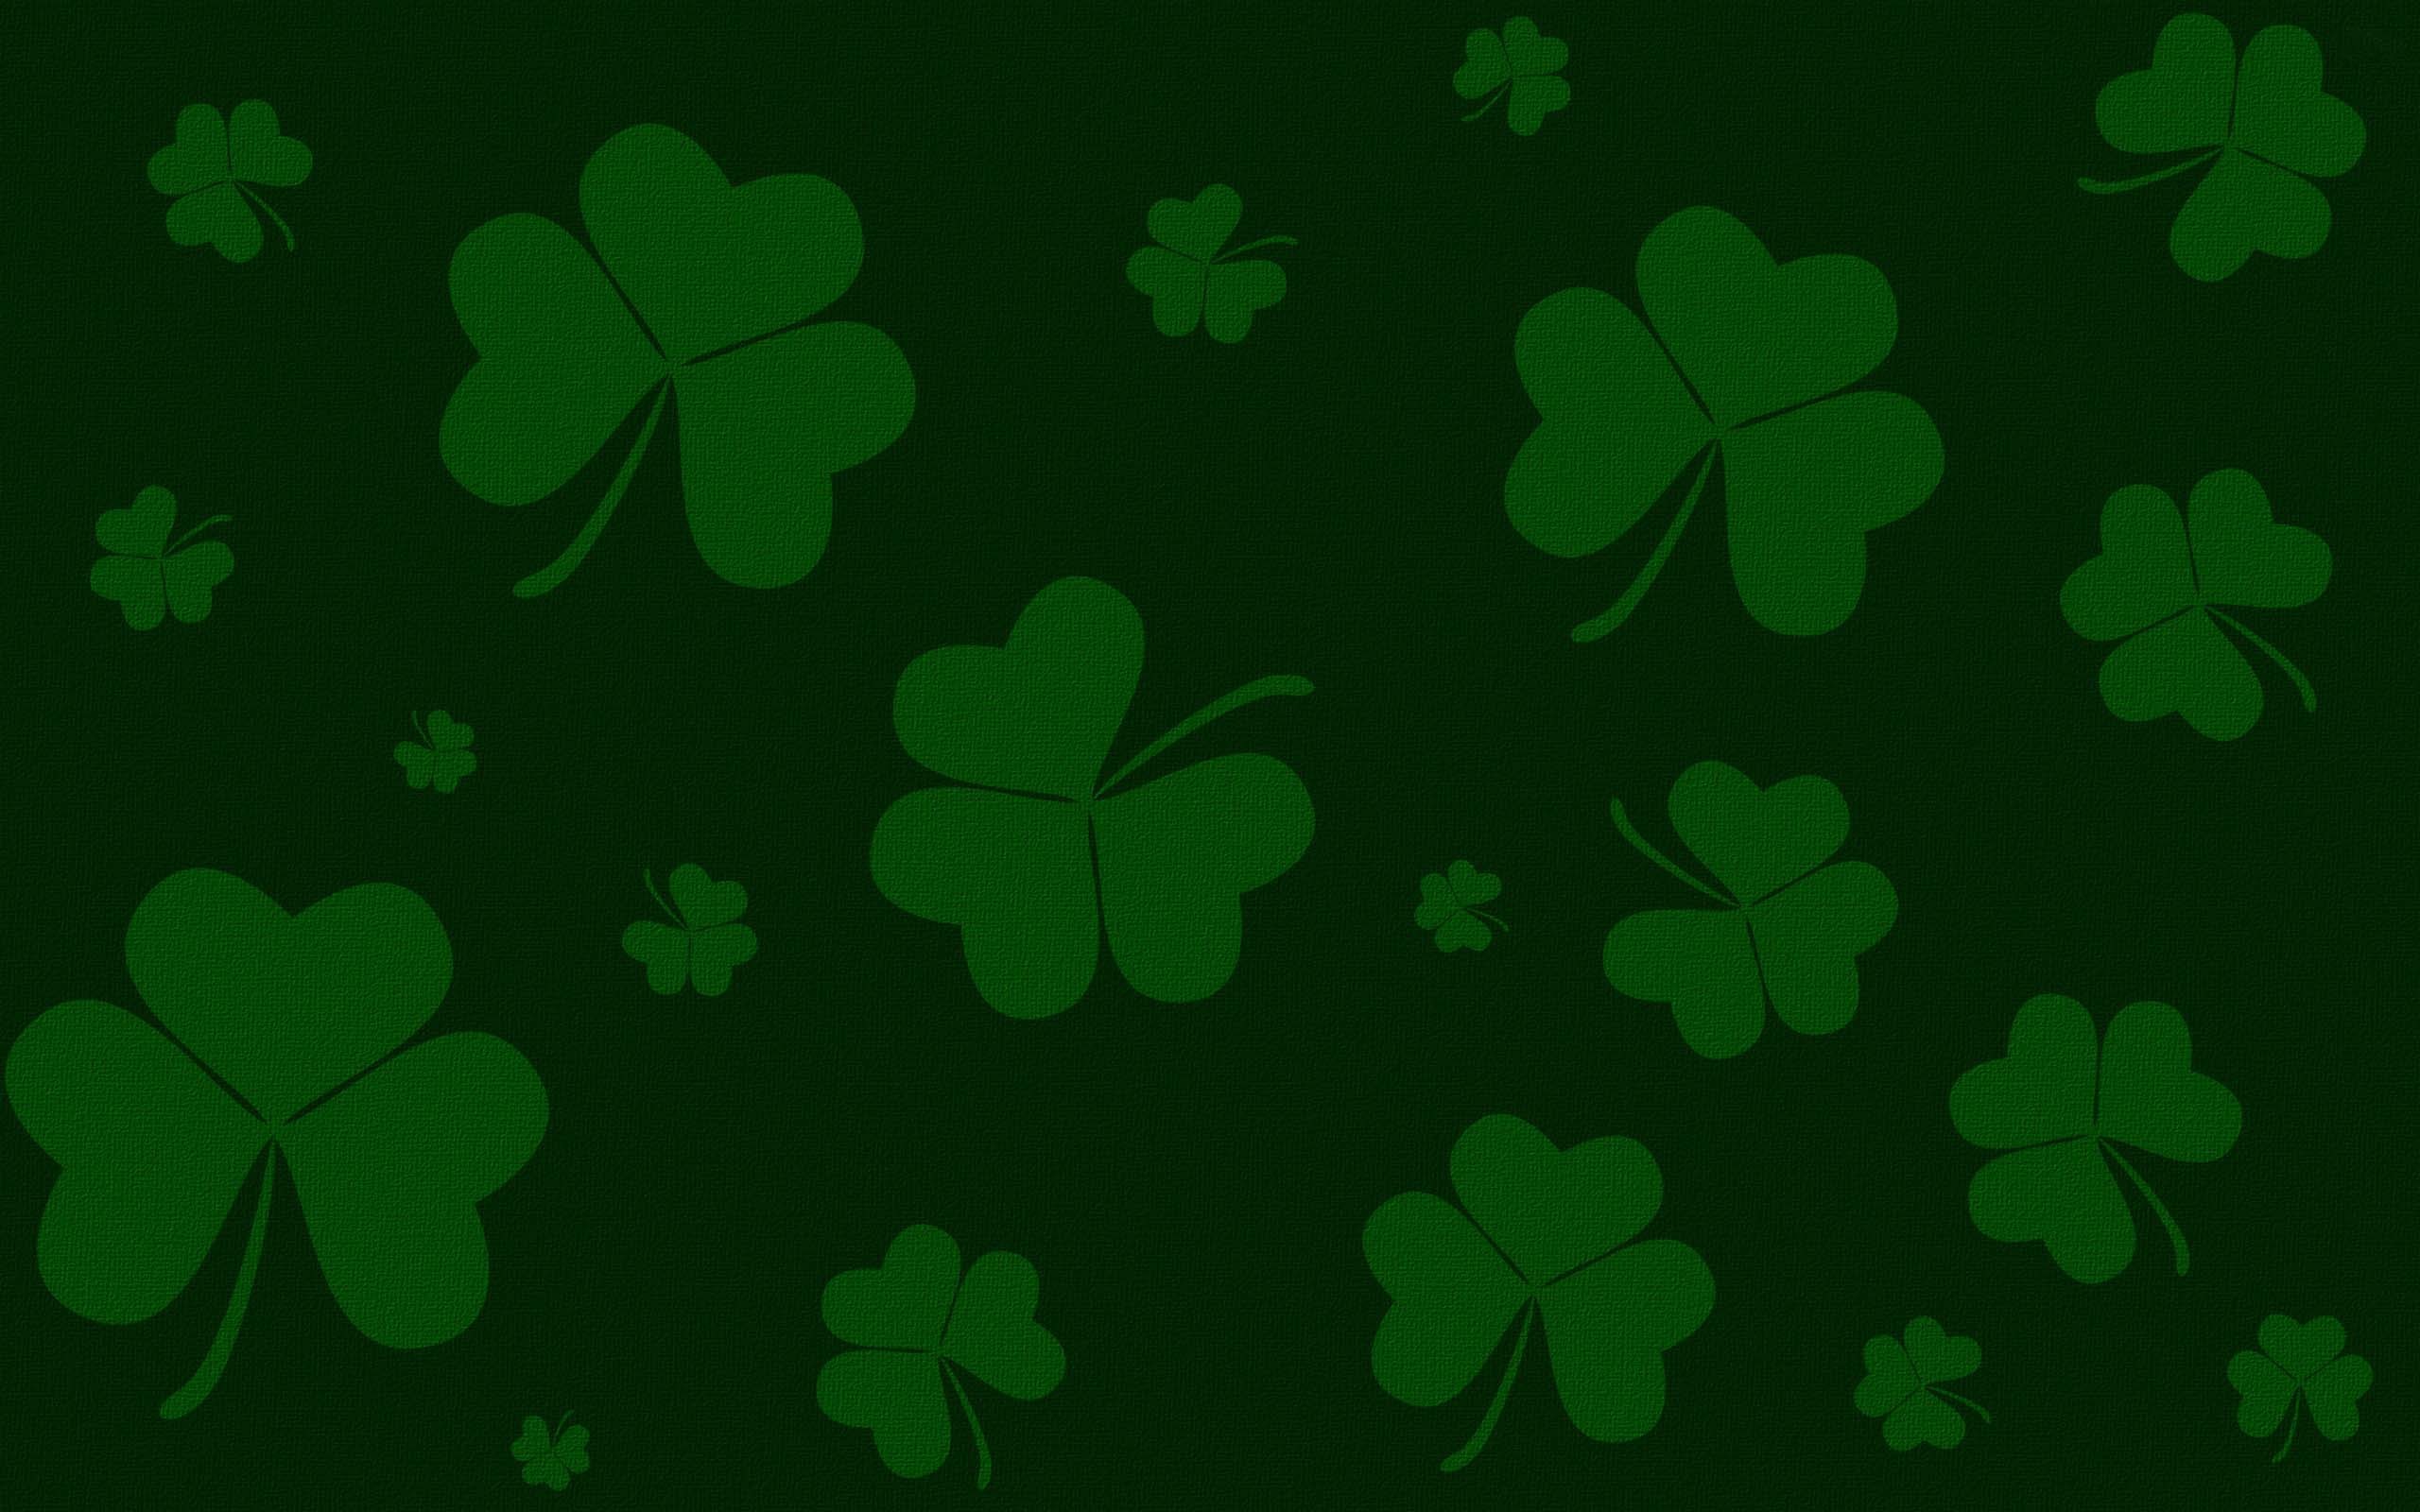 30 St Patrick Day Wallpapers You Can Download Free